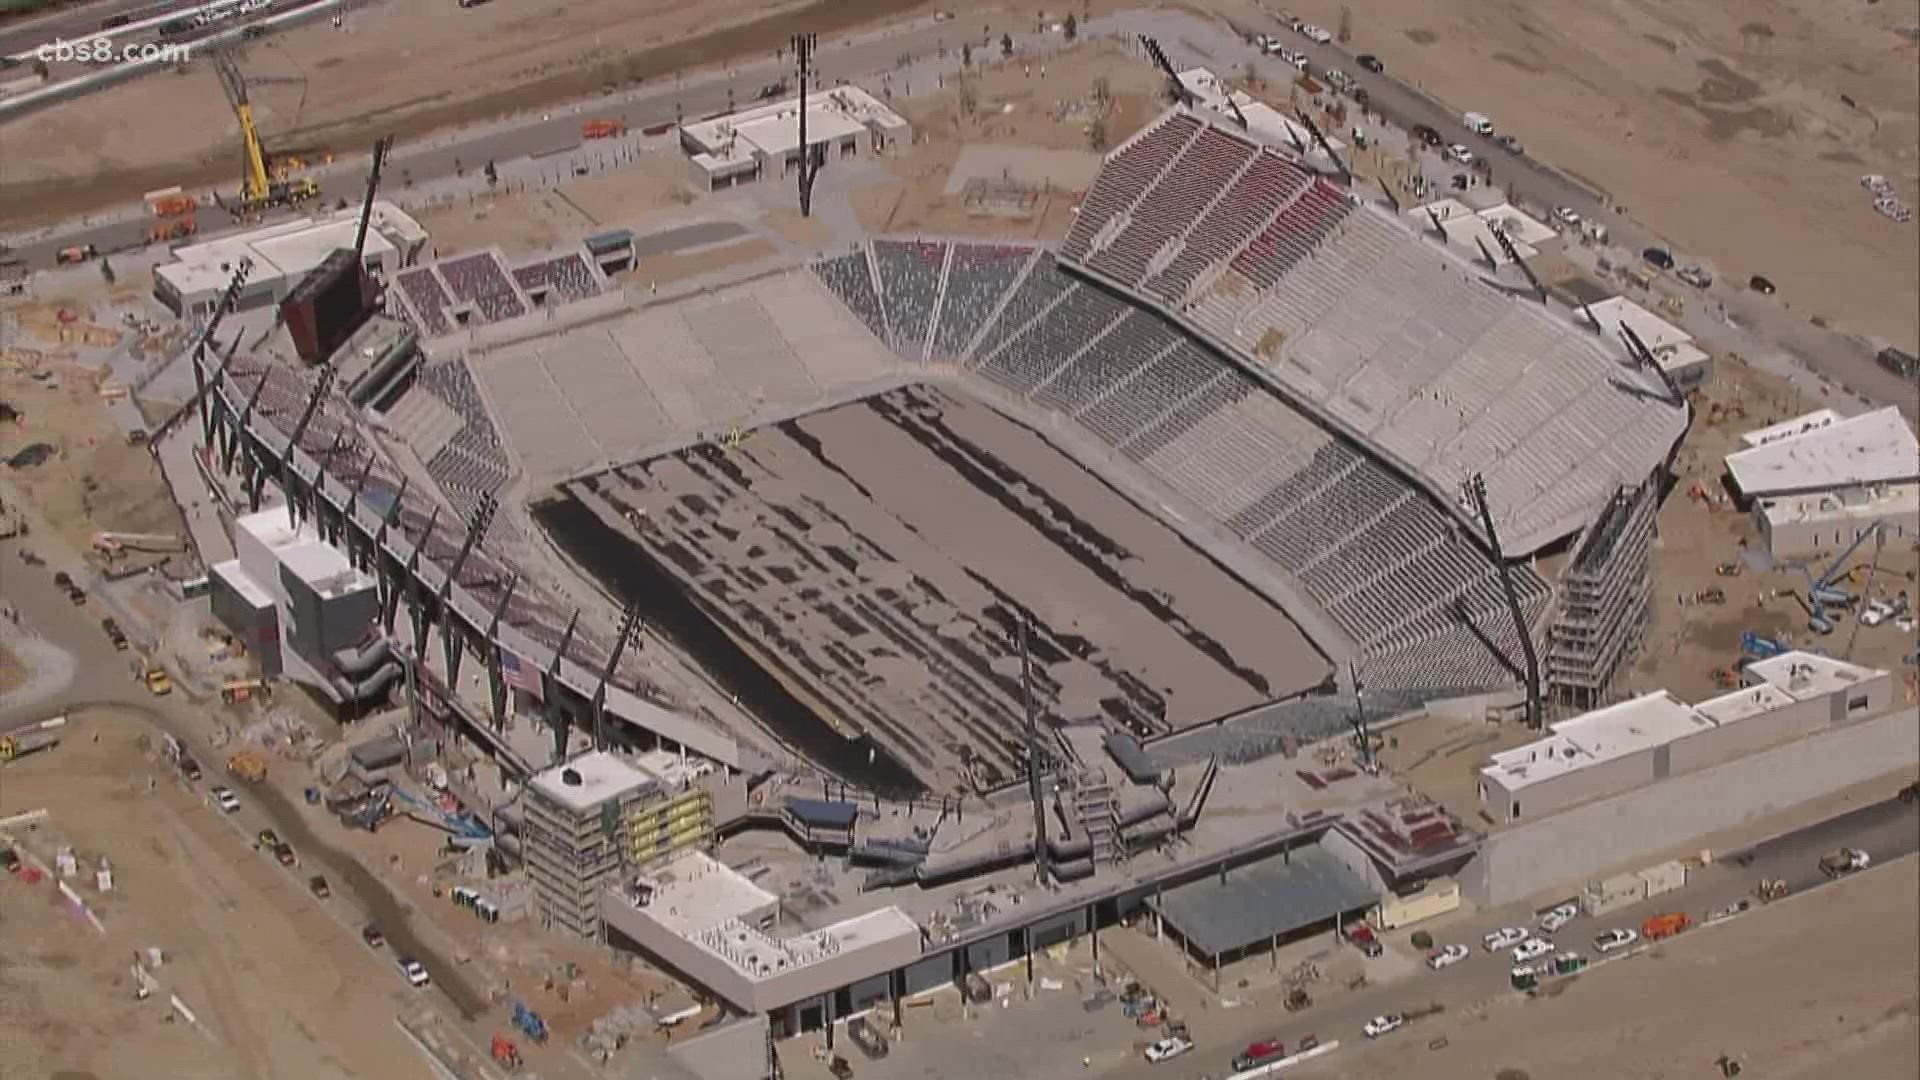 Chopper 8 flew over Snapdragon Stadium on March 7, 2022 to see how the construction of Snapdragon Stadium was coming along.